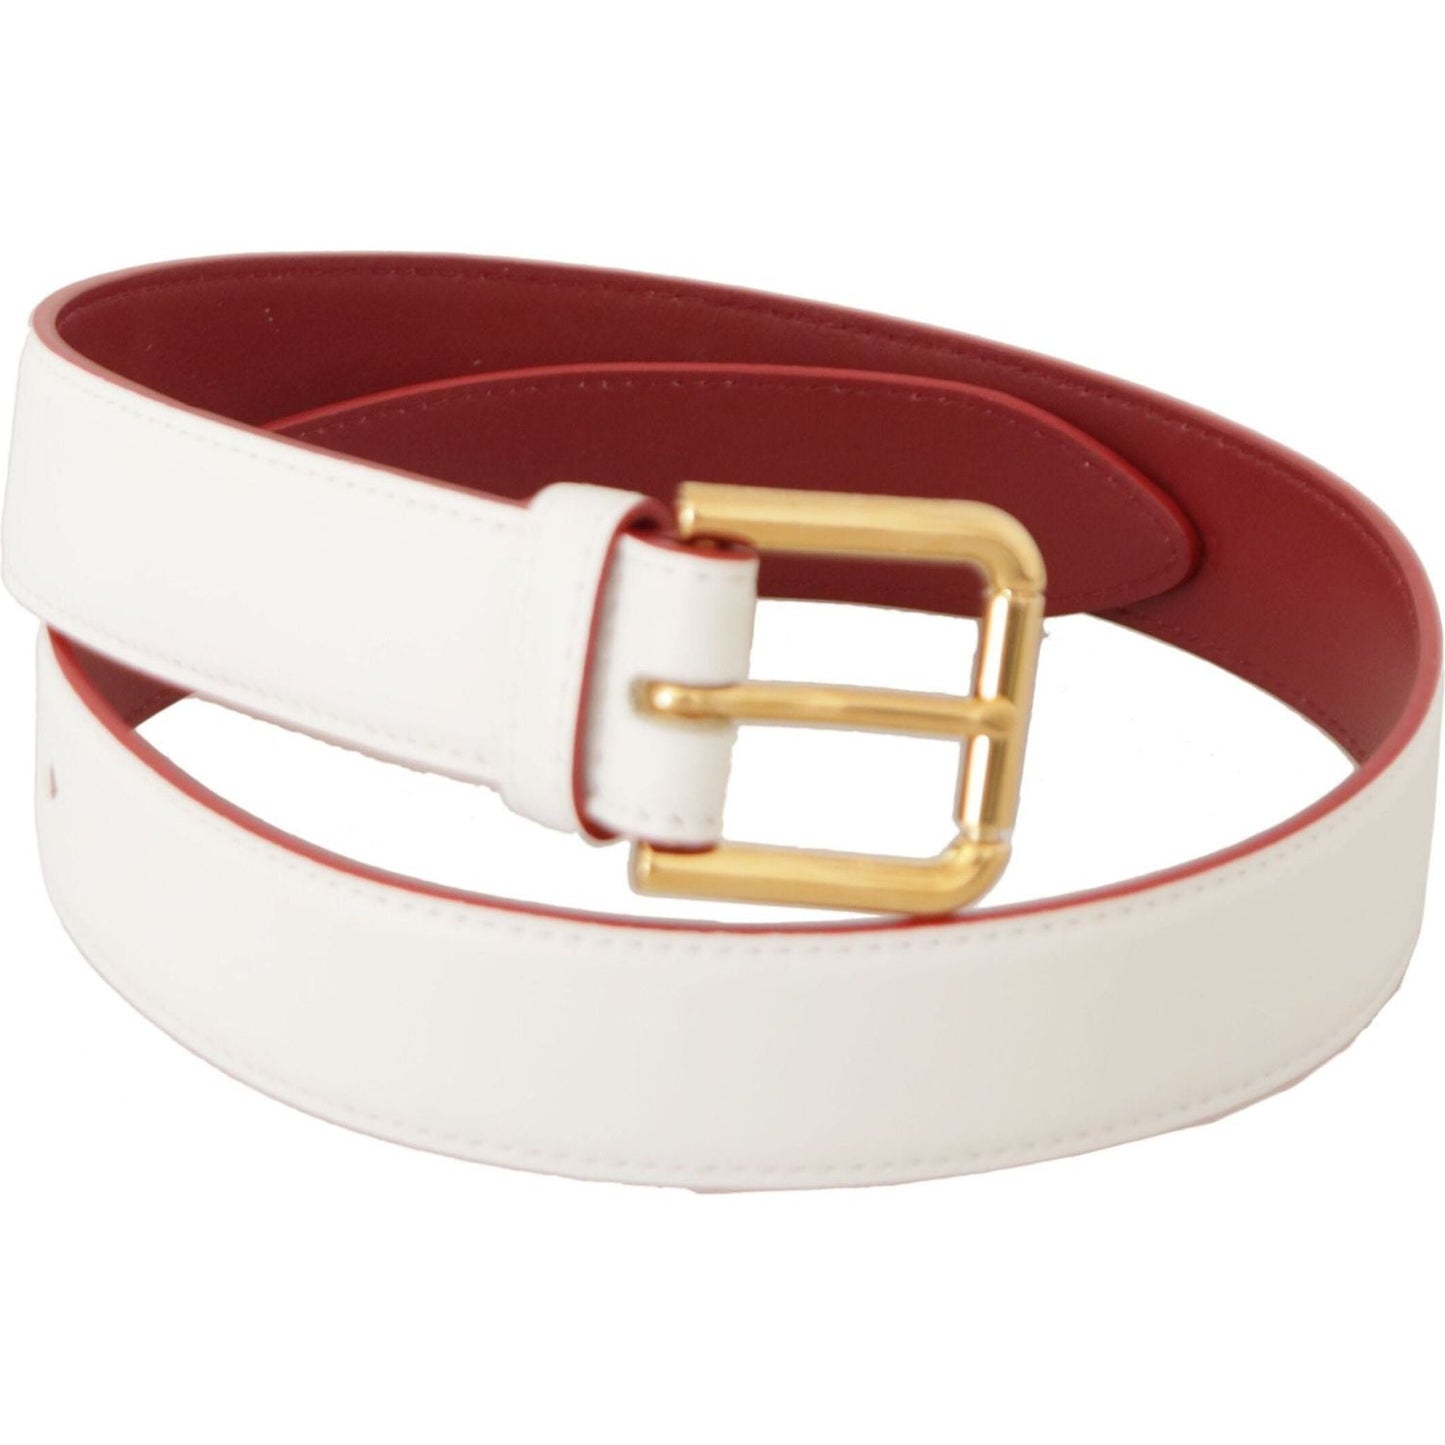 Dolce & Gabbana Elegant White Leather Belt with Engraved Buckle white-calf-leather-two-toned-gold-metal-buckle-belt IMG_0412-1-scaled-1b8a64e6-651.jpg